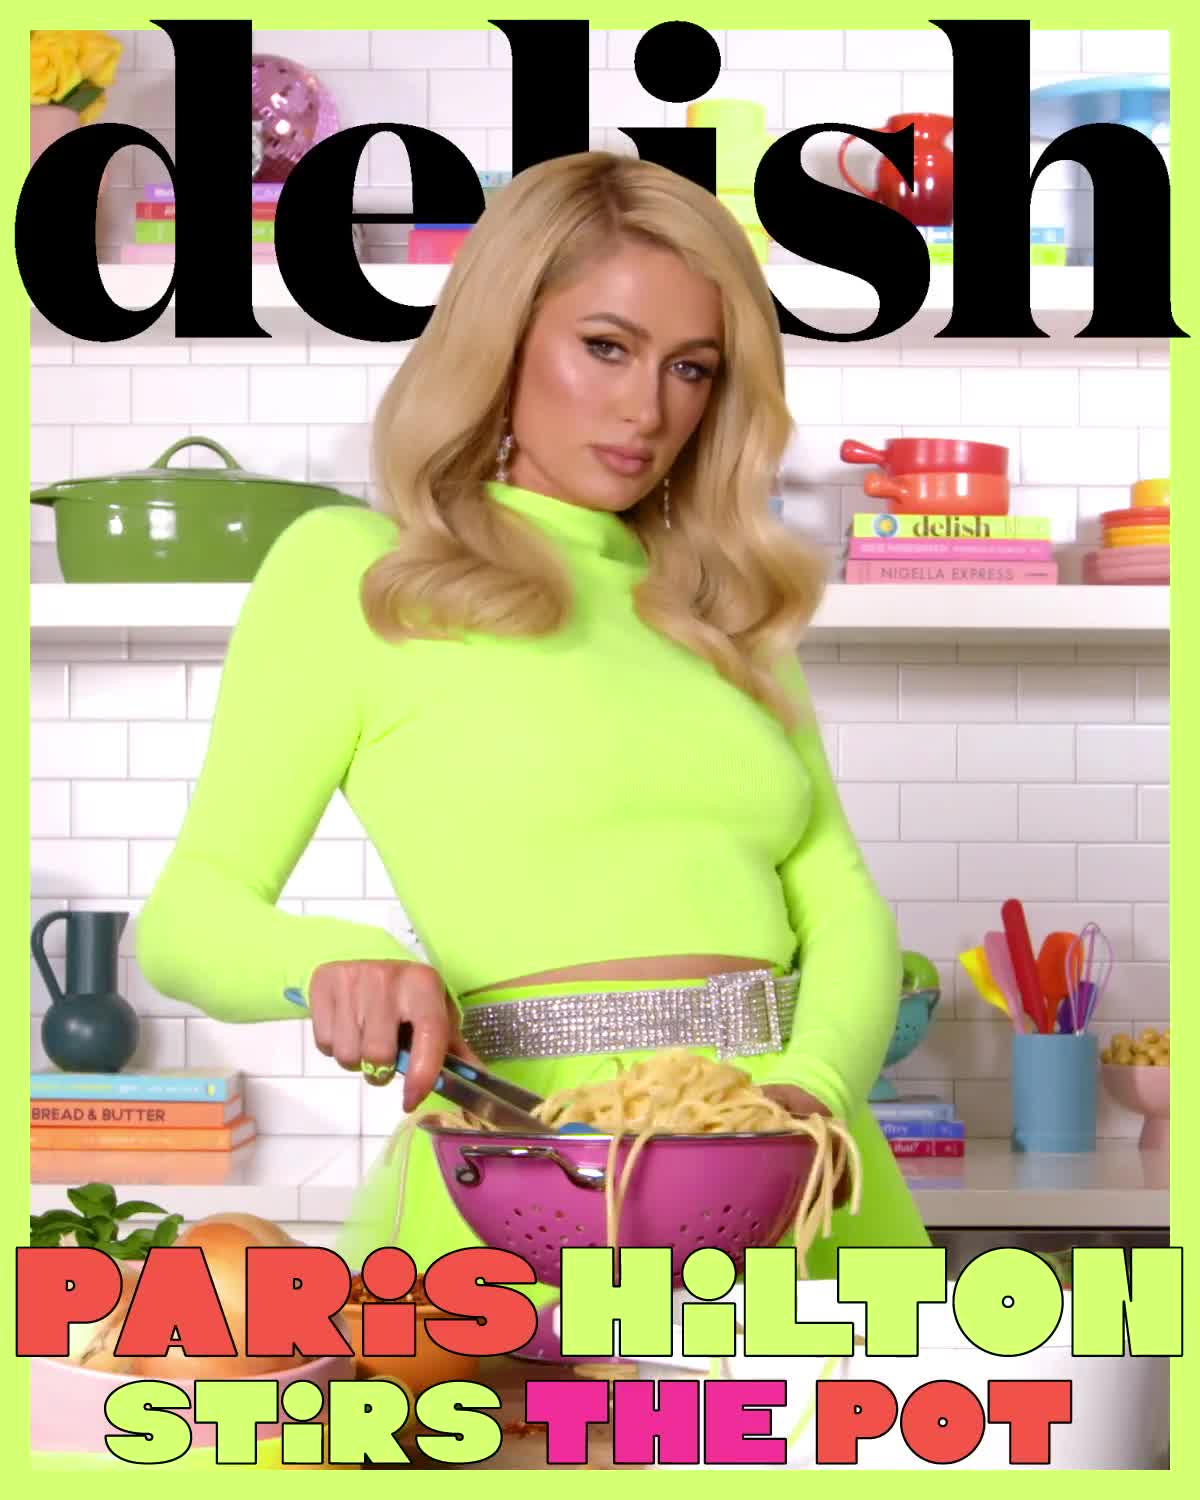 Not just Paris: How did the celebrity who can't cook become food